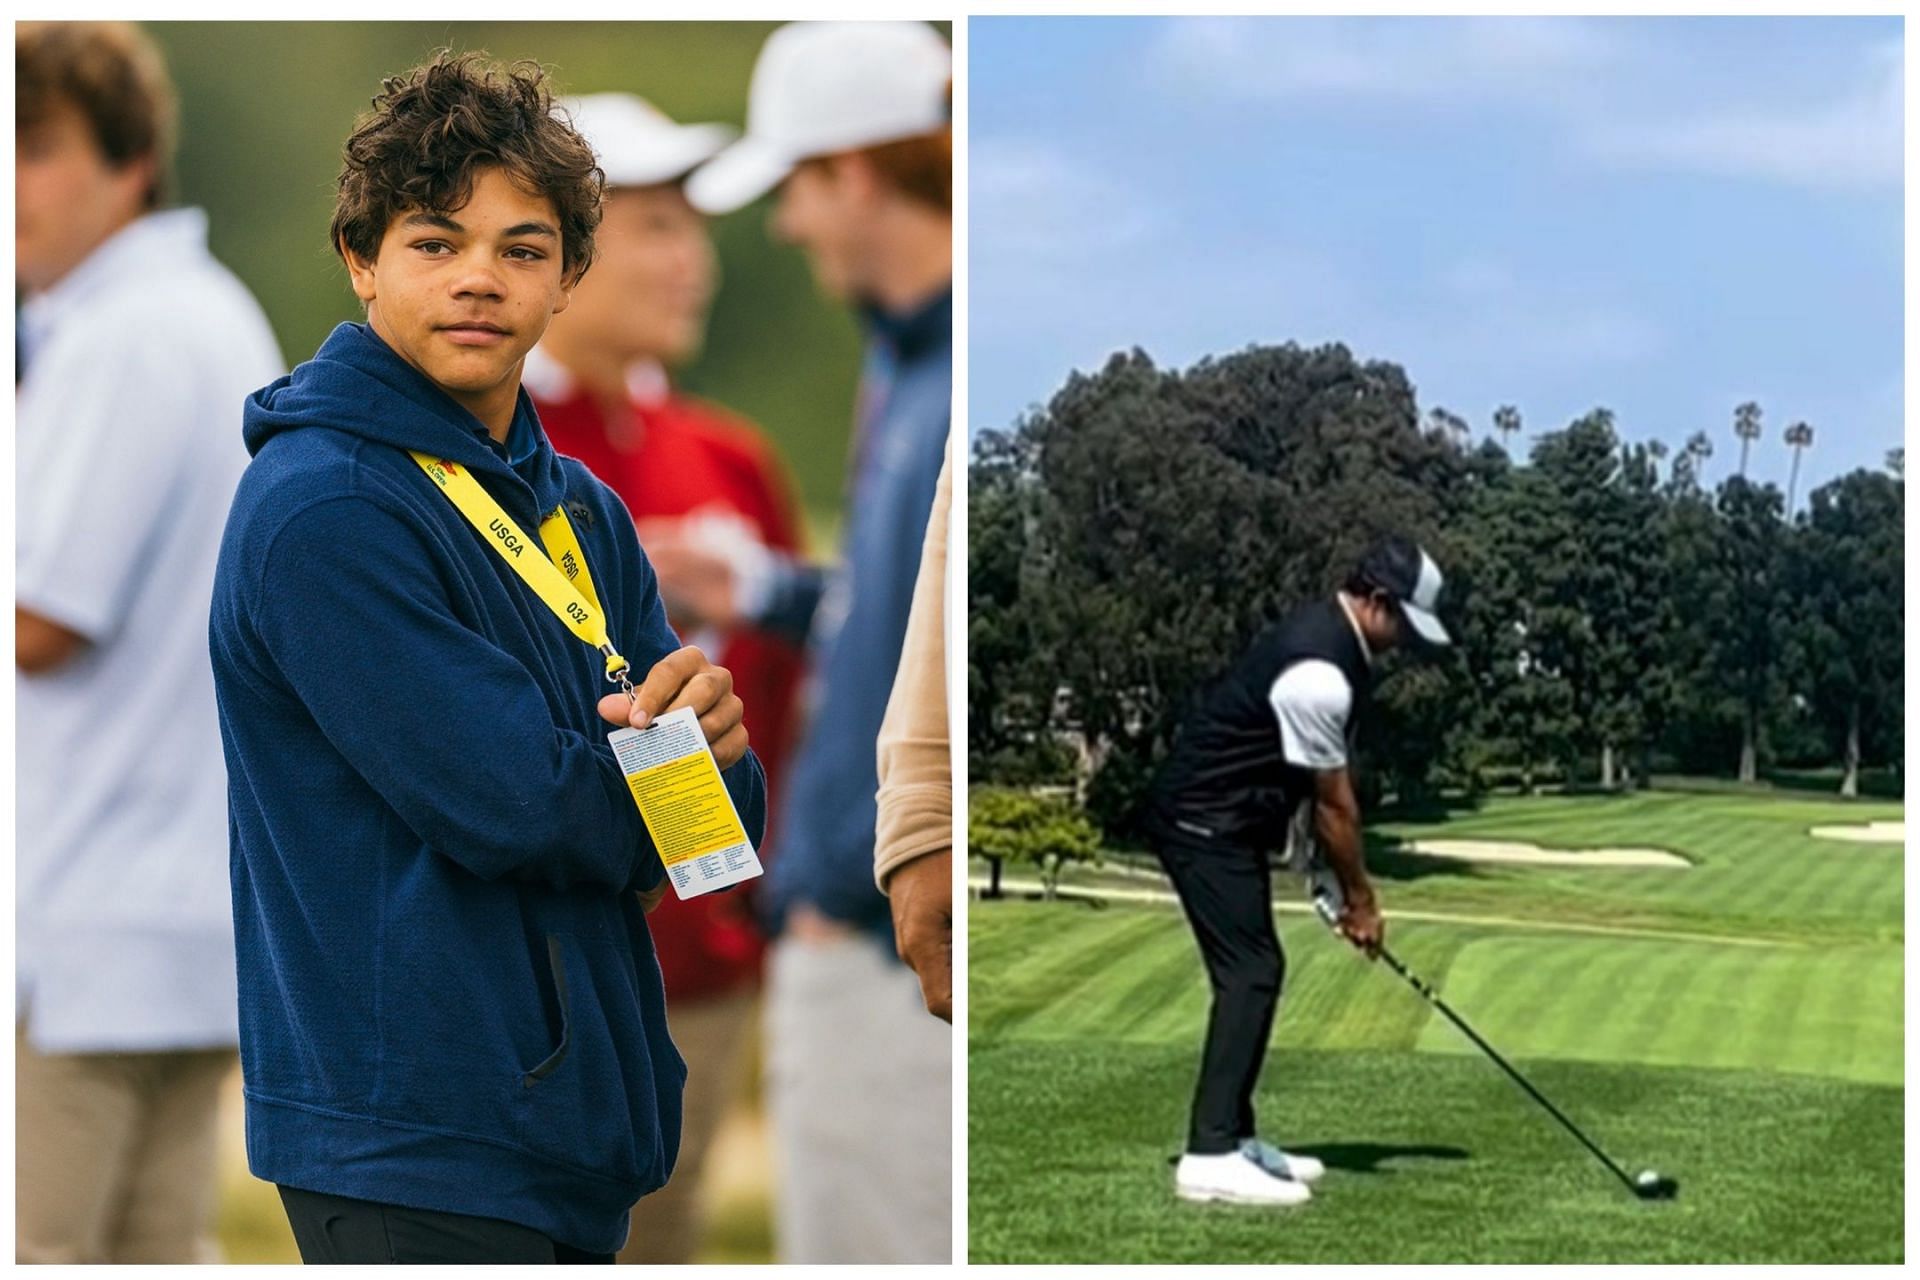 Charlie Woods was seen practicing at the Riviera Golf Club and enjoying the US Open Round 1 at LACC( Image via twitter.com/usopengolf and instagram.com/waldlucas